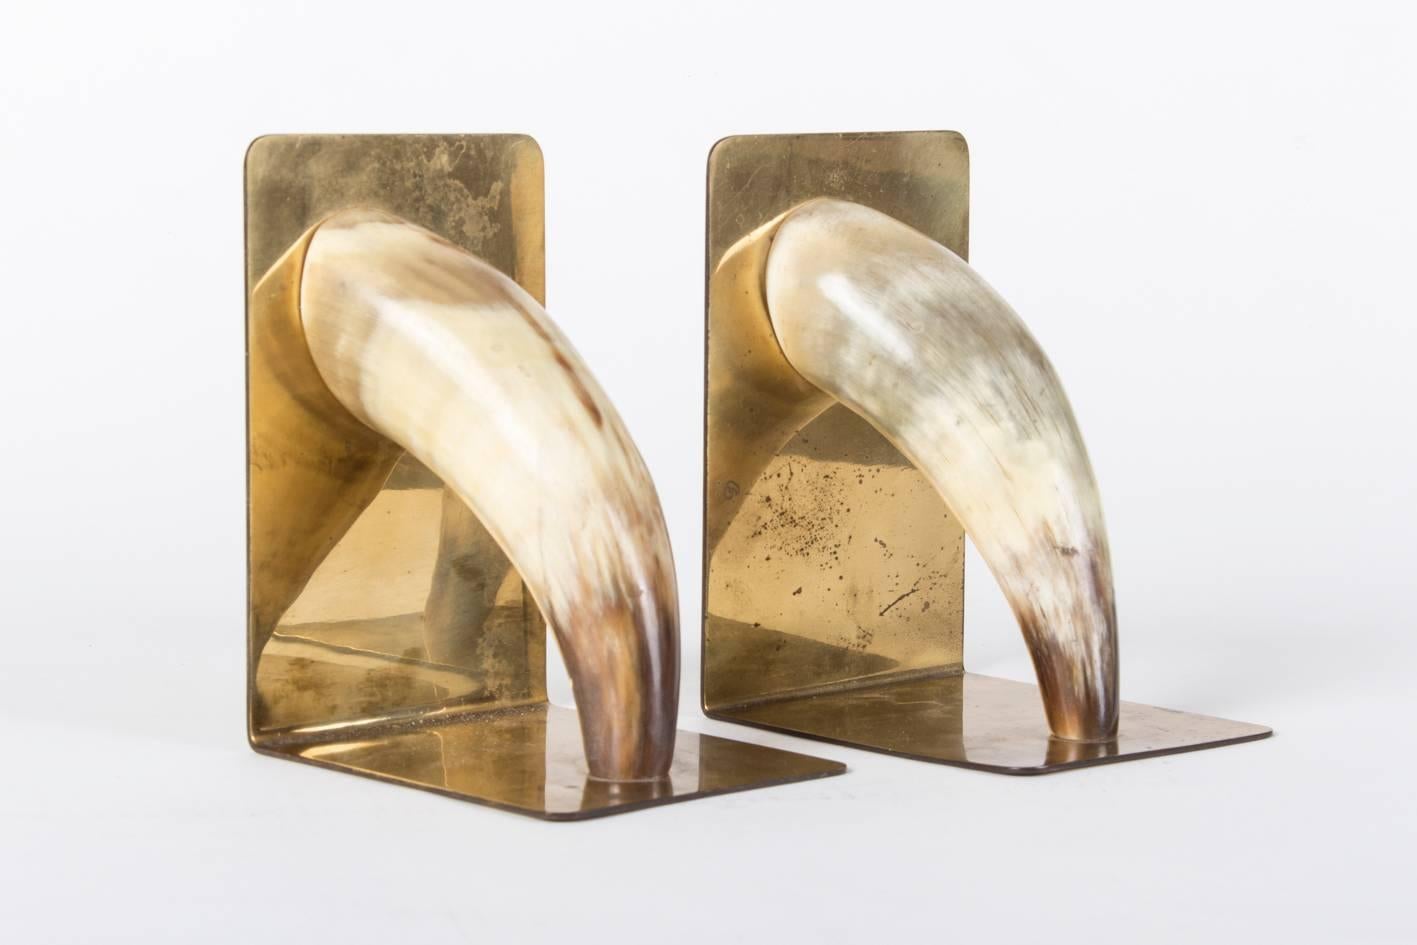 Nice set of the well-known Auböck bookends, marked and made of brass and polished horn.